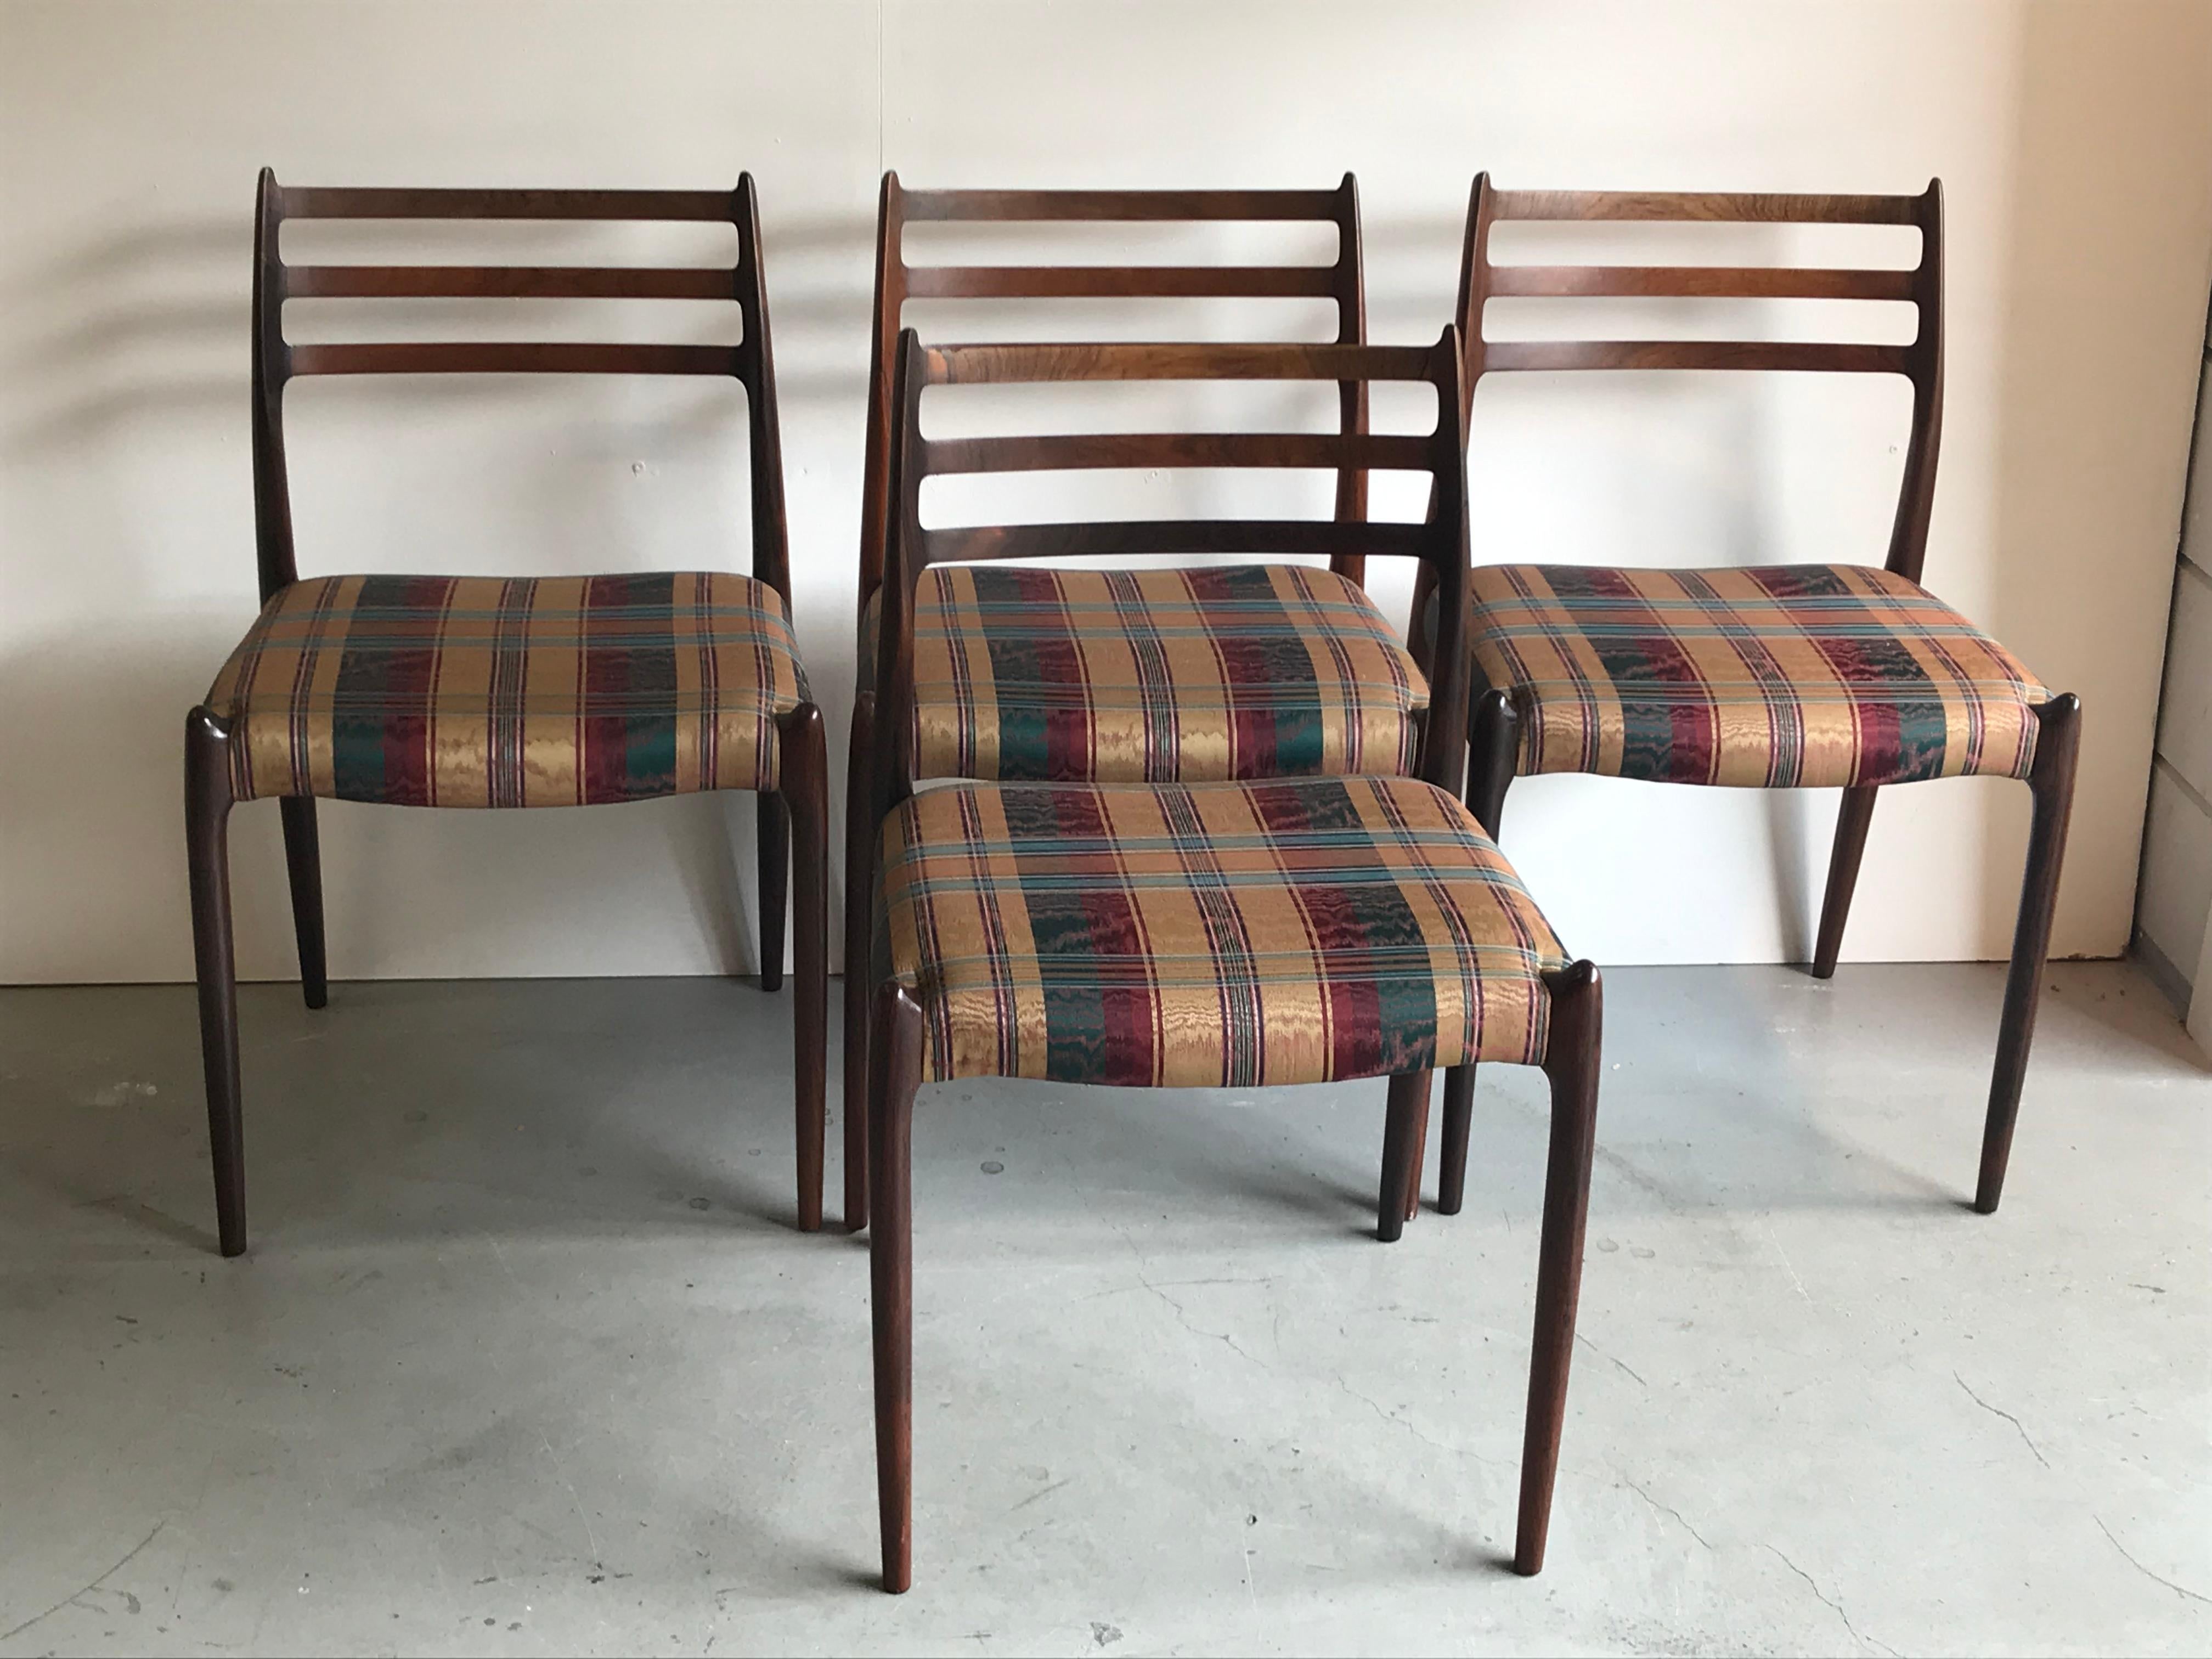 Set of 4 rosewood dining chairs model no.78 designed by Niels O.Moller for J.L Moller
The chairs are in good original condition.